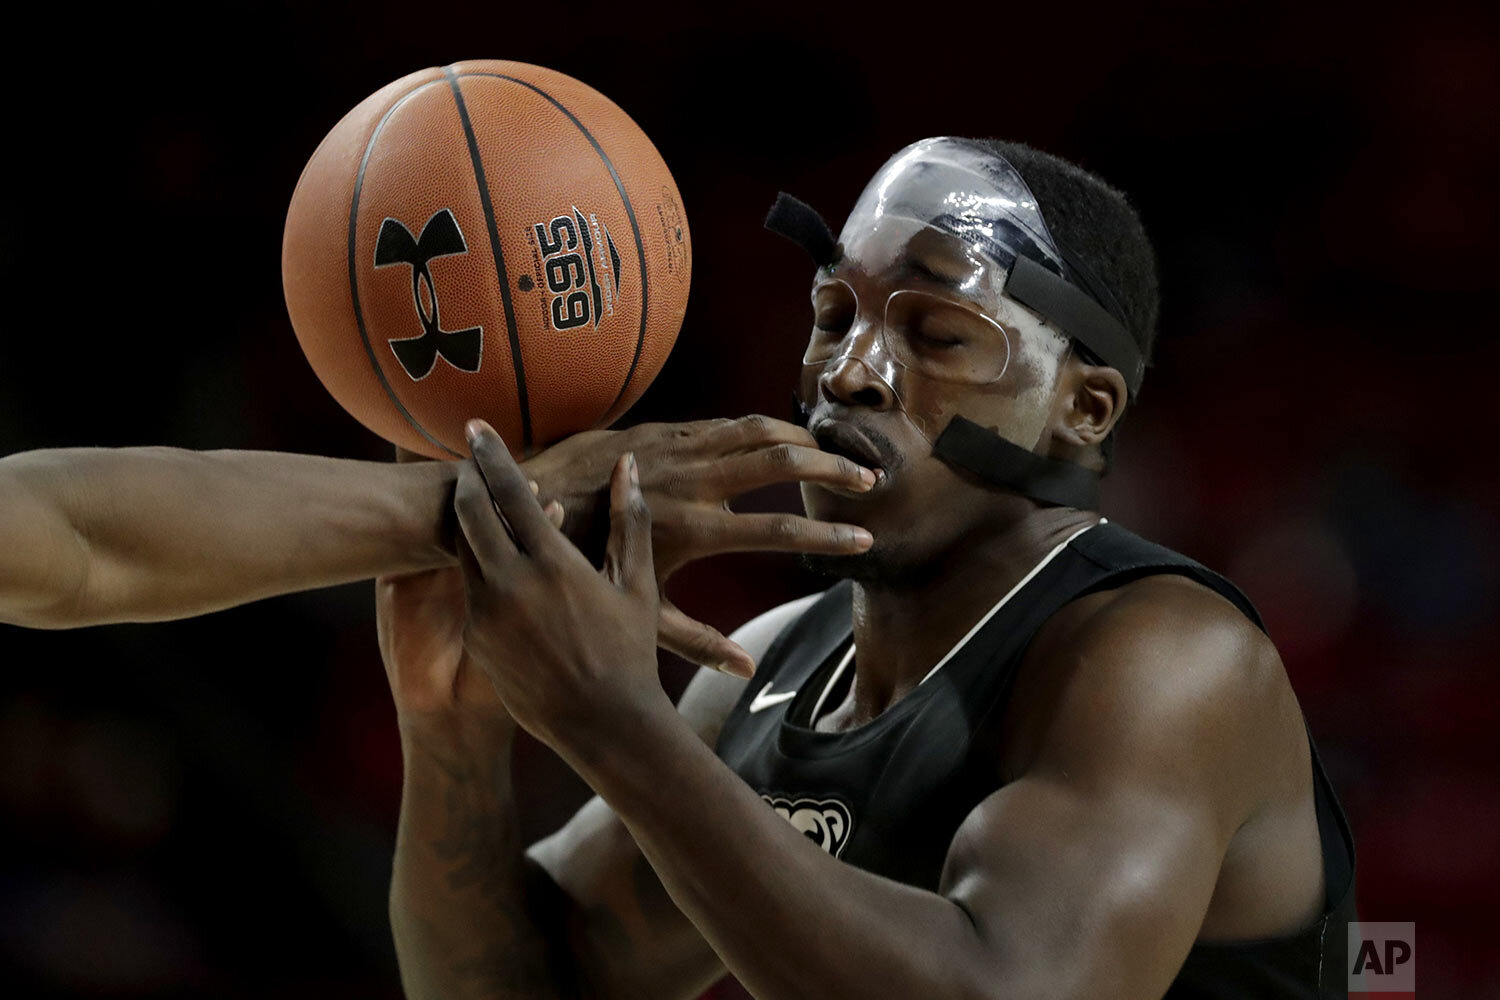  Oakland forward Xavier Hill-Mais, right, tries to control the ball to shoot as Maryland forward Jalen Smith reaches in during the first half of an NCAA college basketball game, Saturday, Nov. 16, 2019, in College Park, Md. (AP Photo/Julio Cortez) 